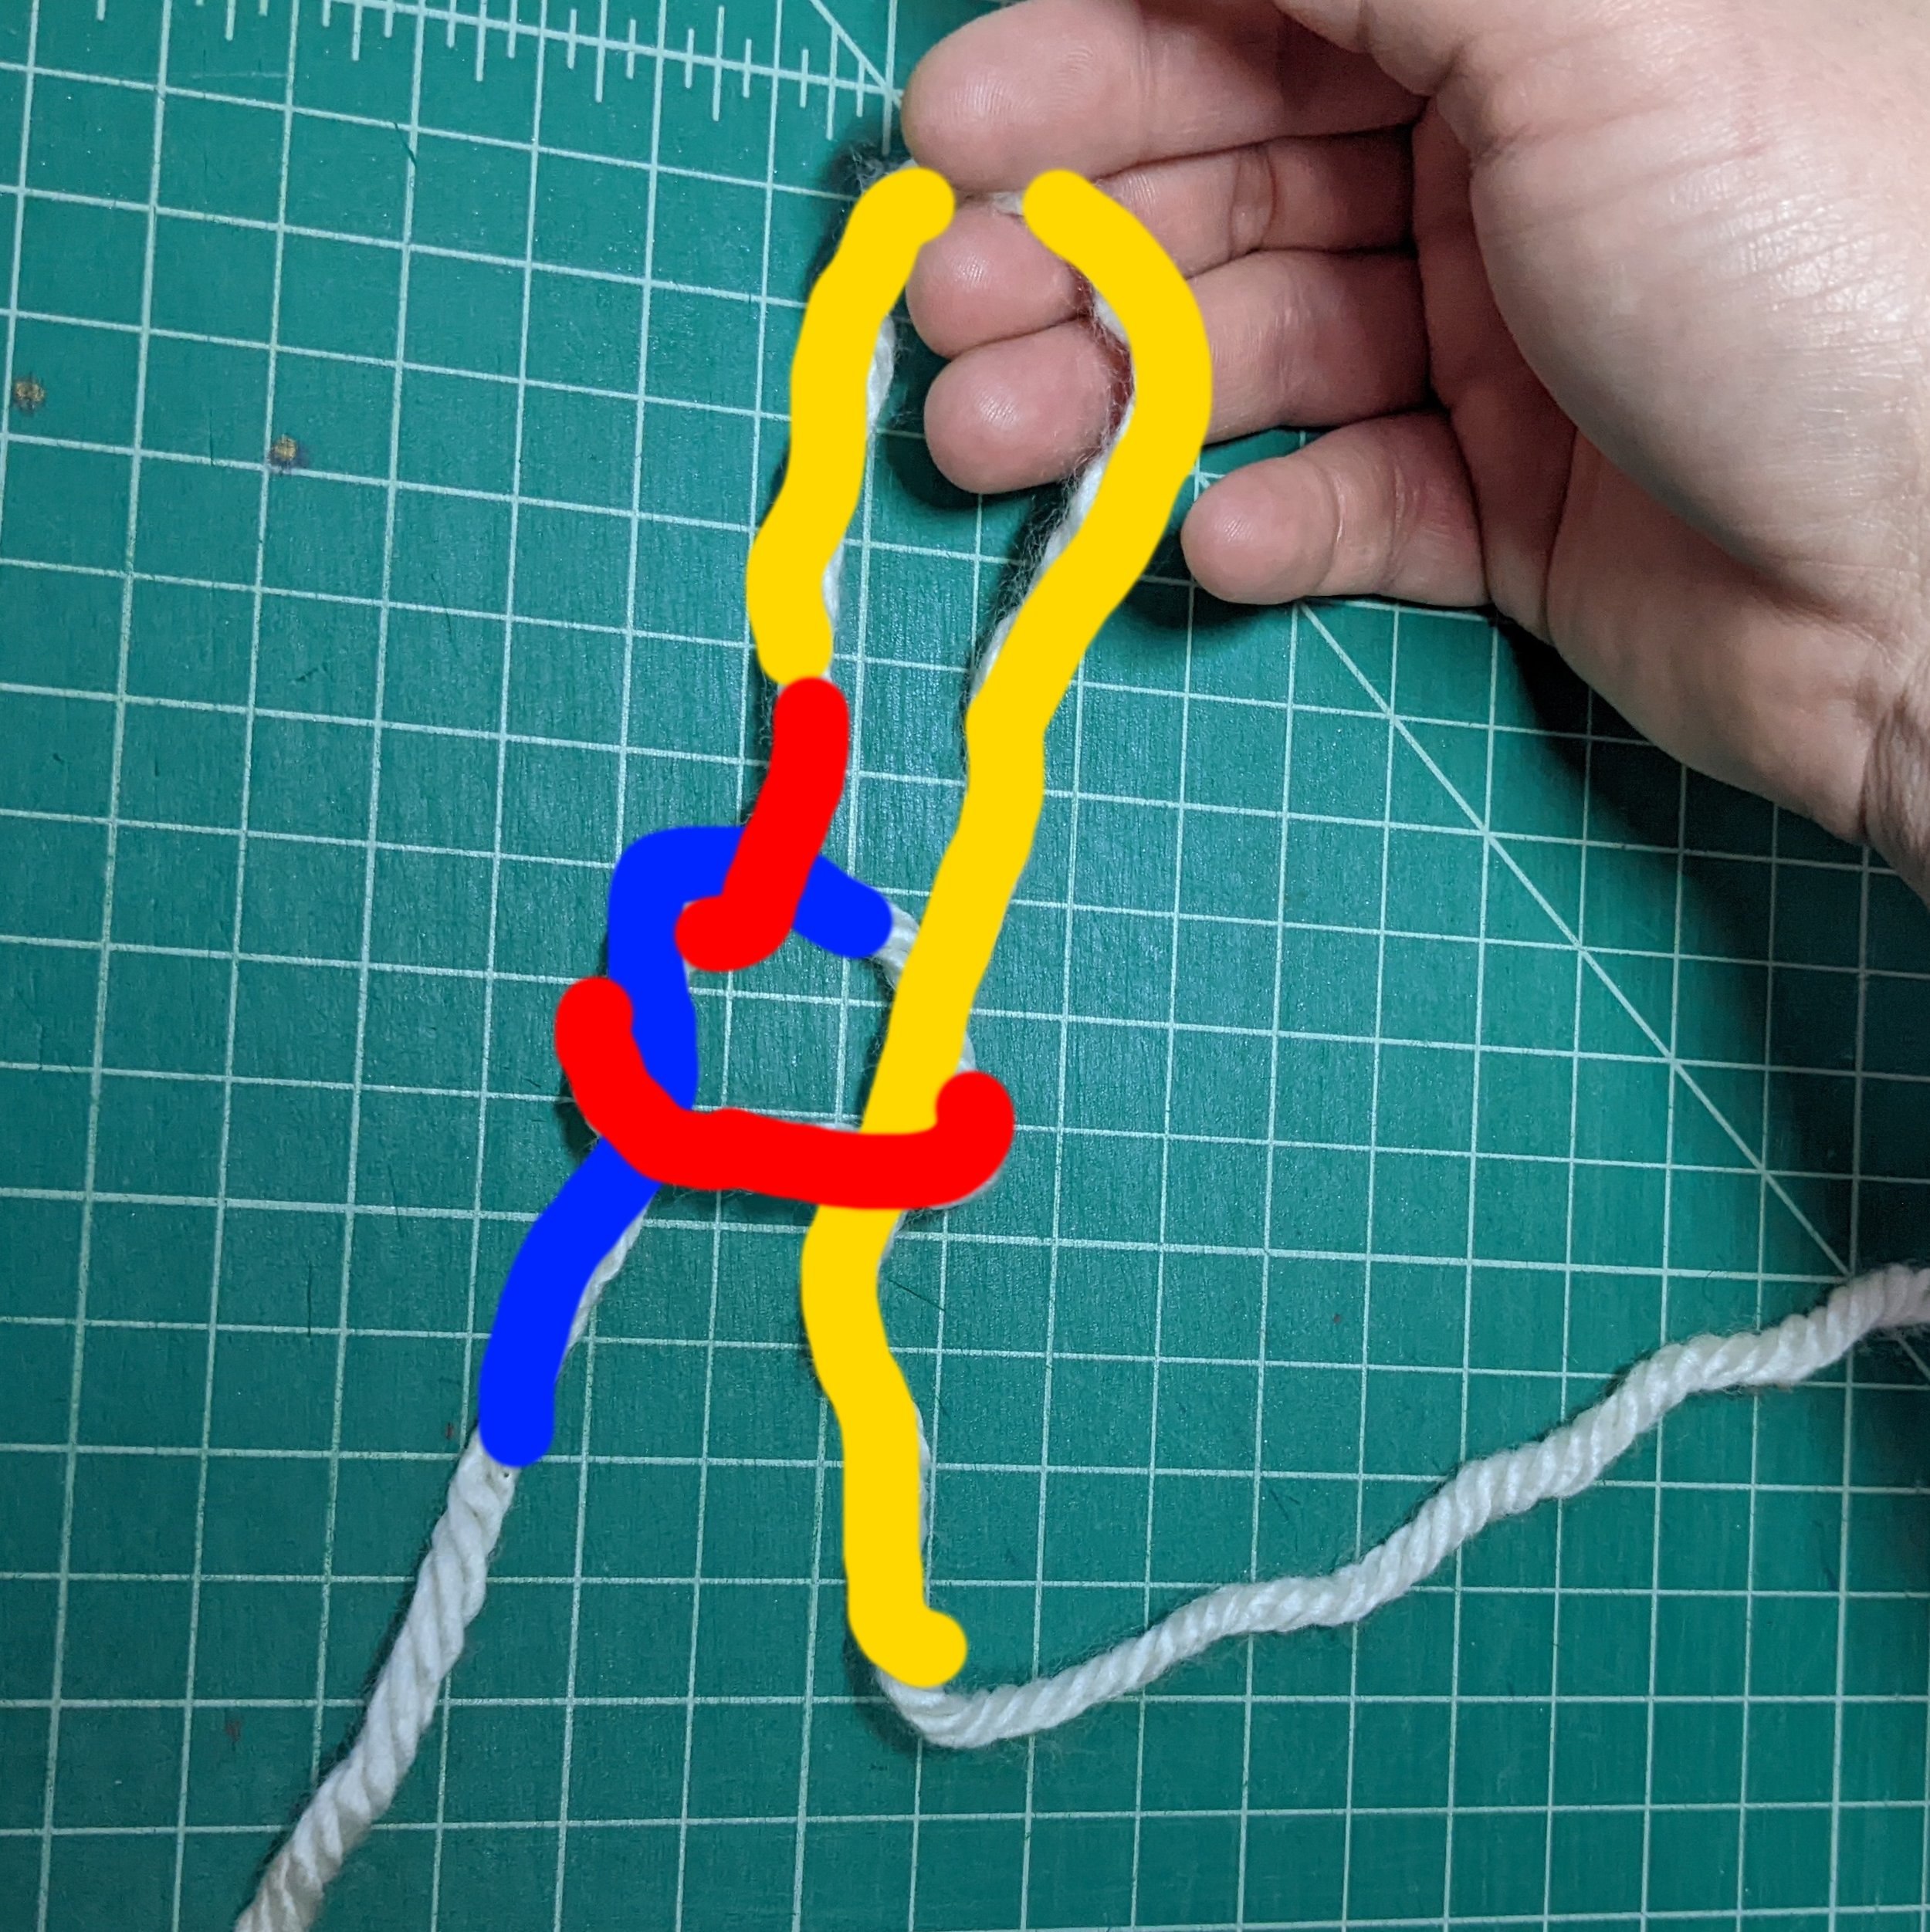 Step 6: Pull the yarn in your right hand to begin forming the loop, while holding onto the ends in your left hand